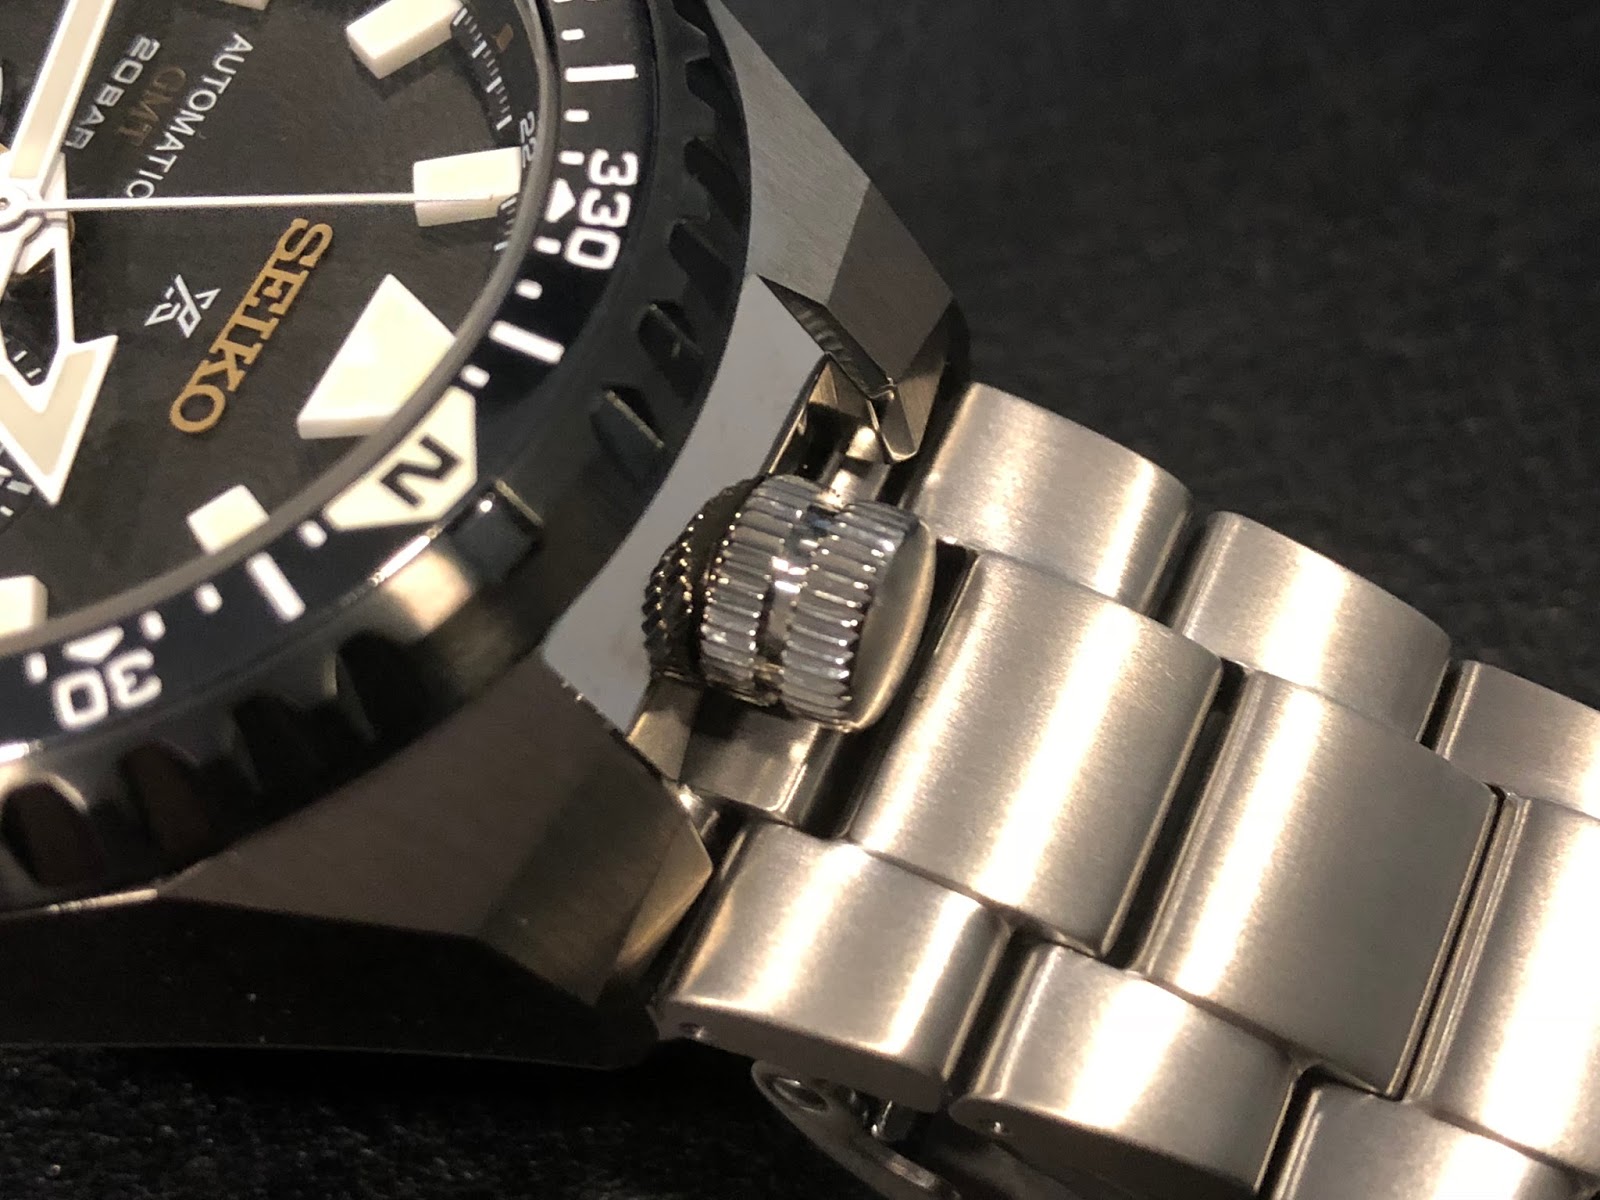 My Eastern Watch Collection: Seiko Prospex Watch Landmaster 25th  Anniversary Limited Titanium Model SBEJ003 (similar to SBEJ001) - Design  flaw & QC issues, A Review (plus Video)